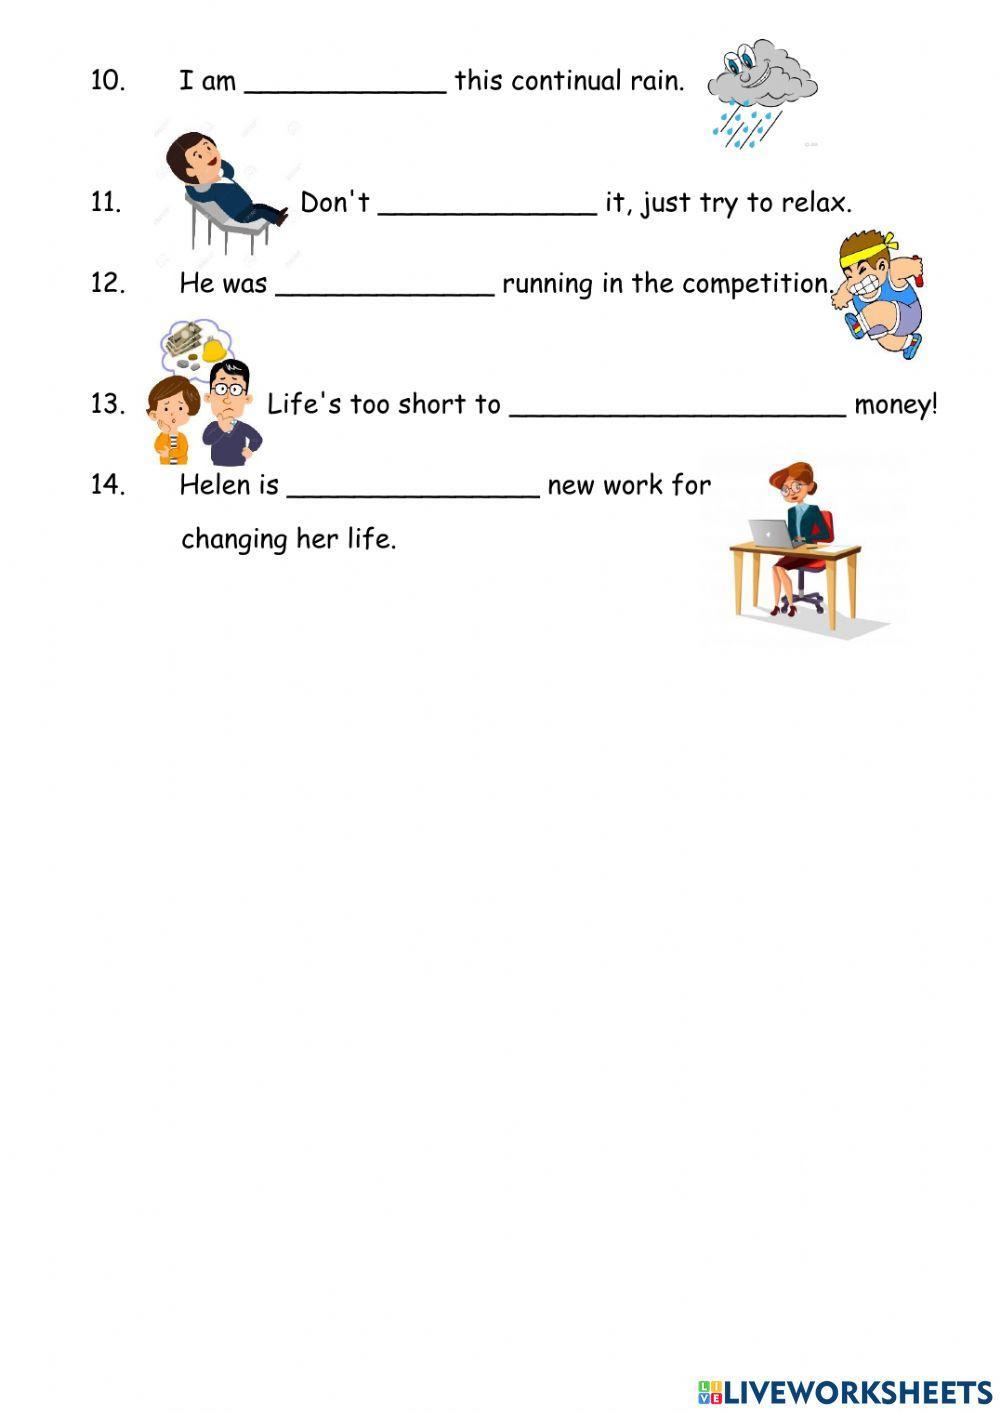 Adjectives + prepositions